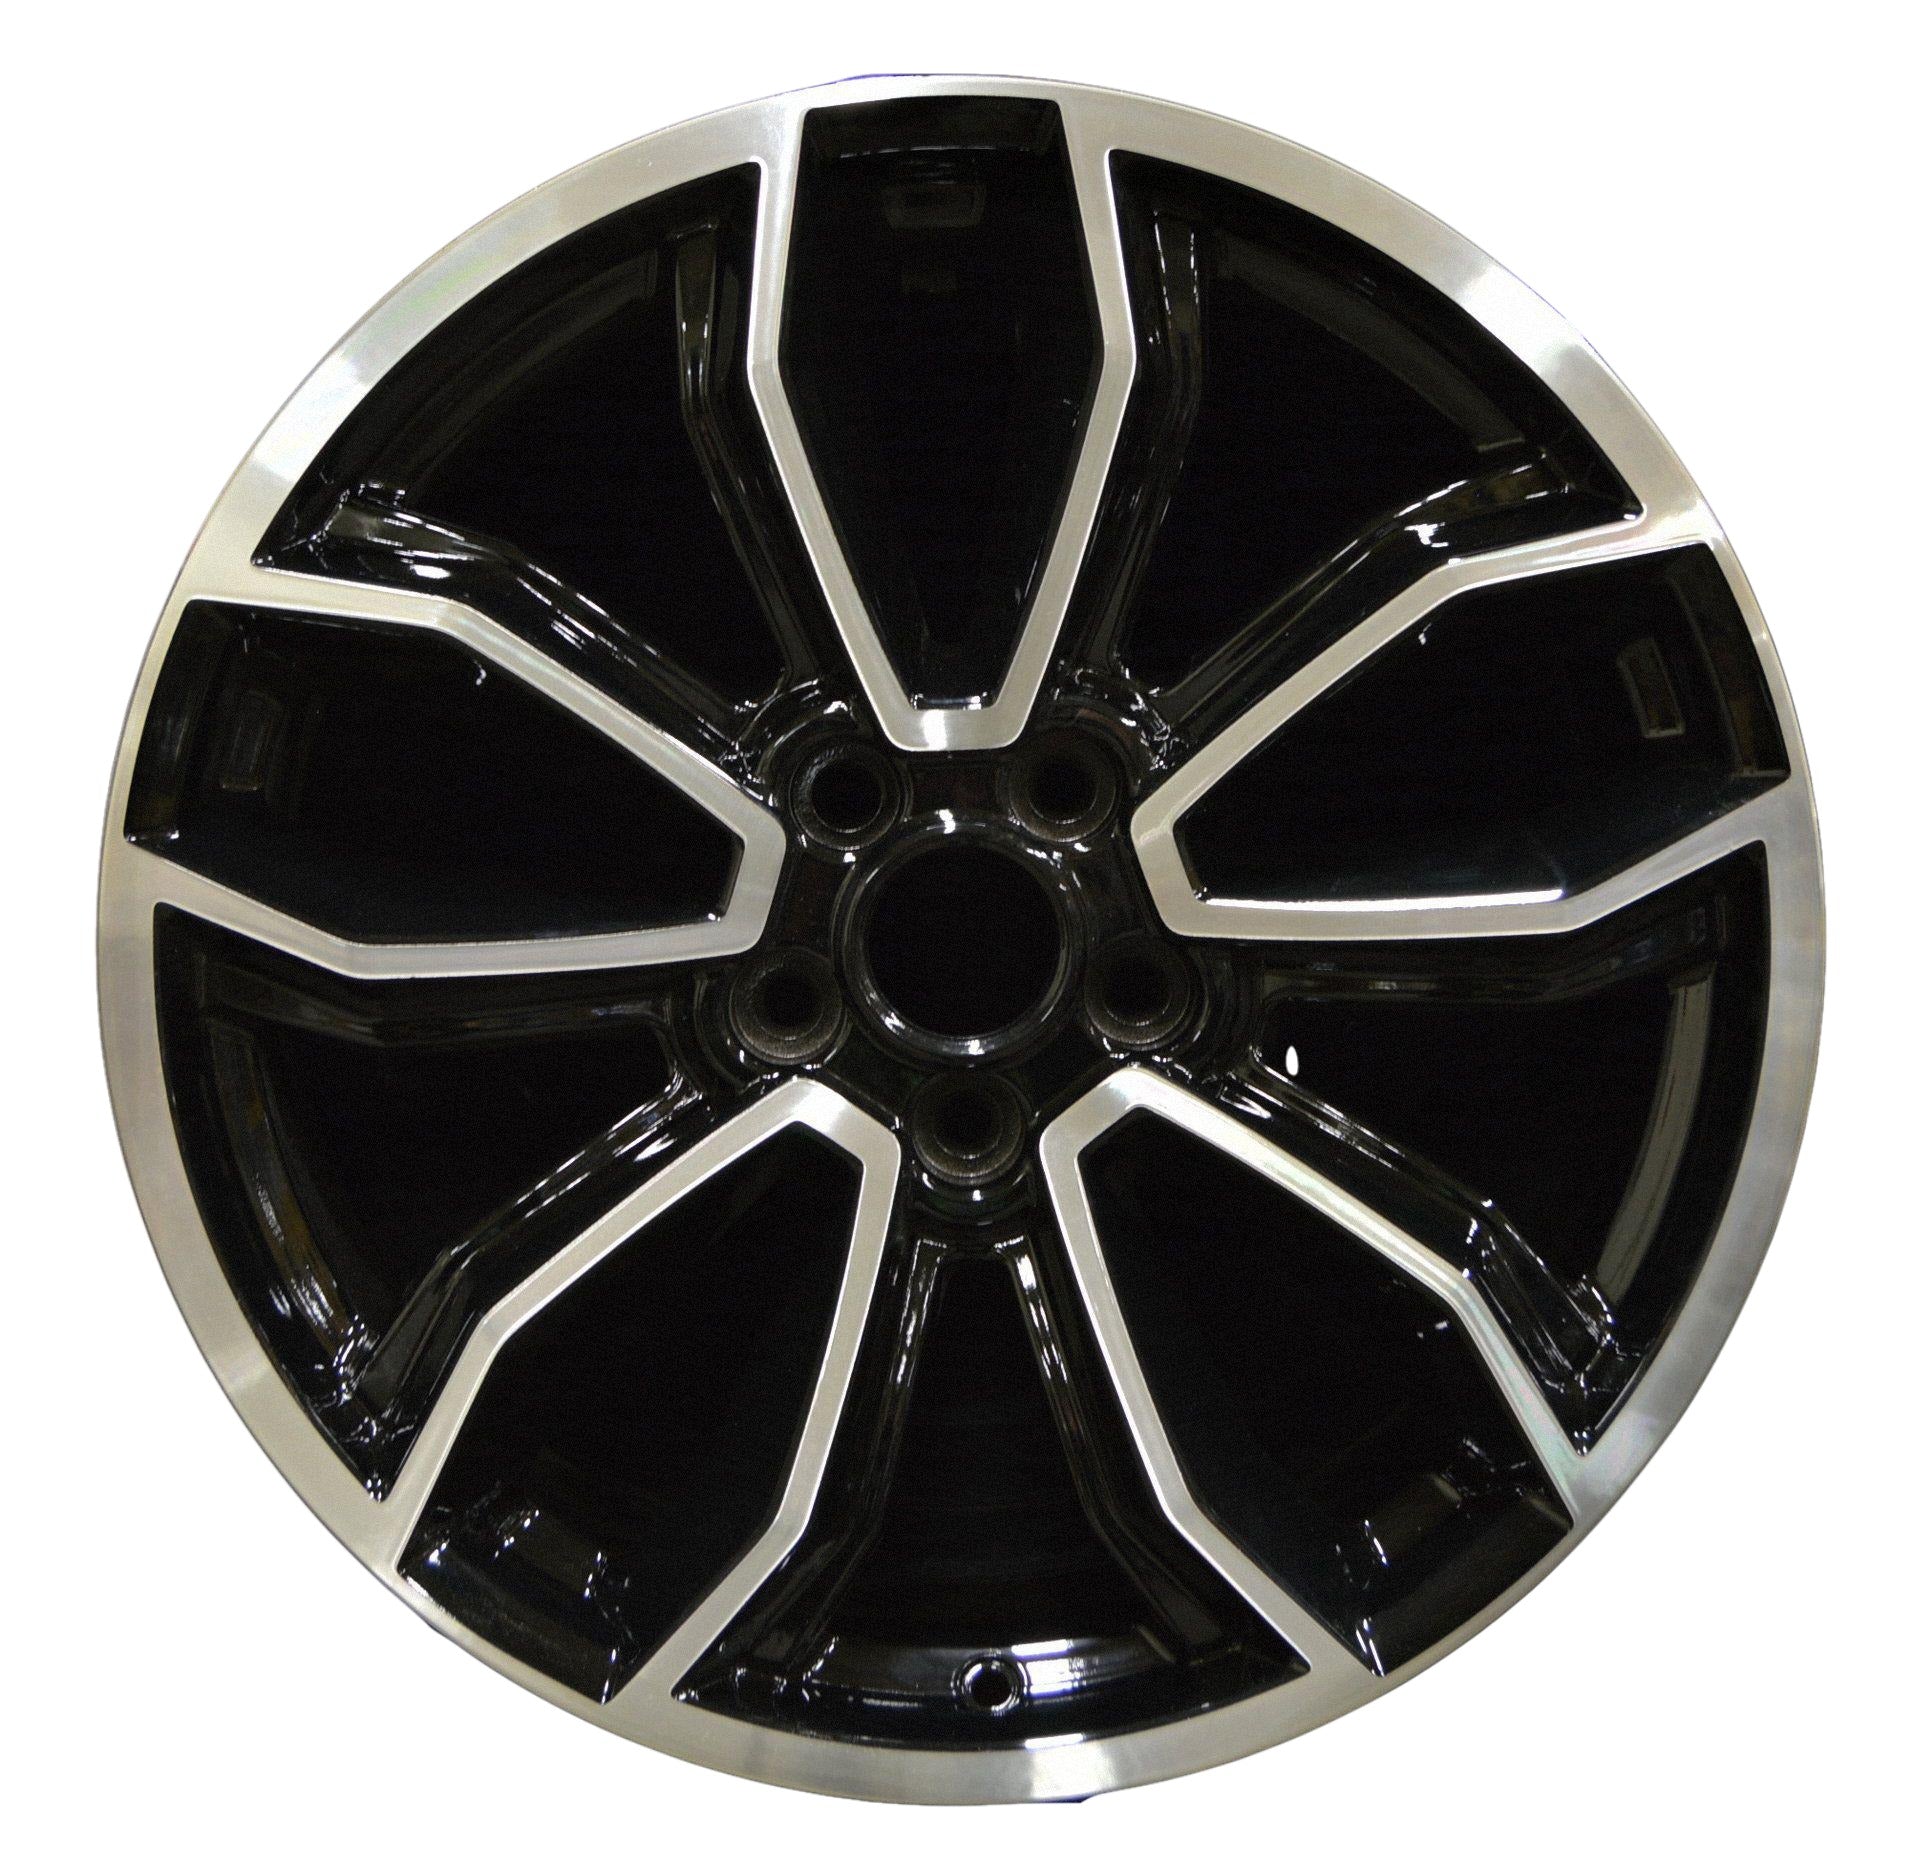 Ford Mustang  2013, 2014 Factory OEM Car Wheel Size 19x8.5 Alloy WAO.3909.PB01.MA